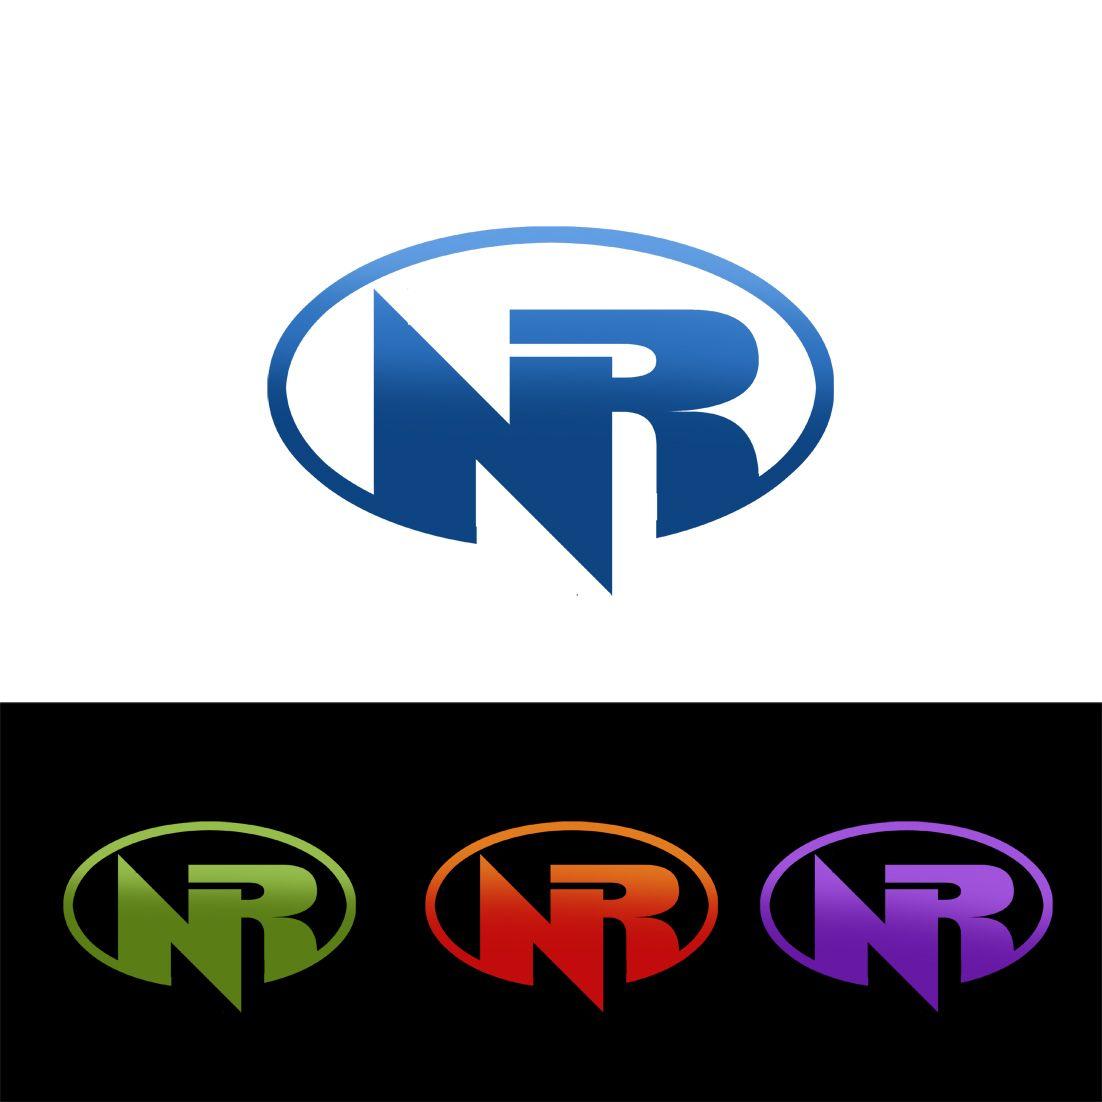 Nr Logo - Modern, Professional, Business Logo Design for NR or NetRescue by ...